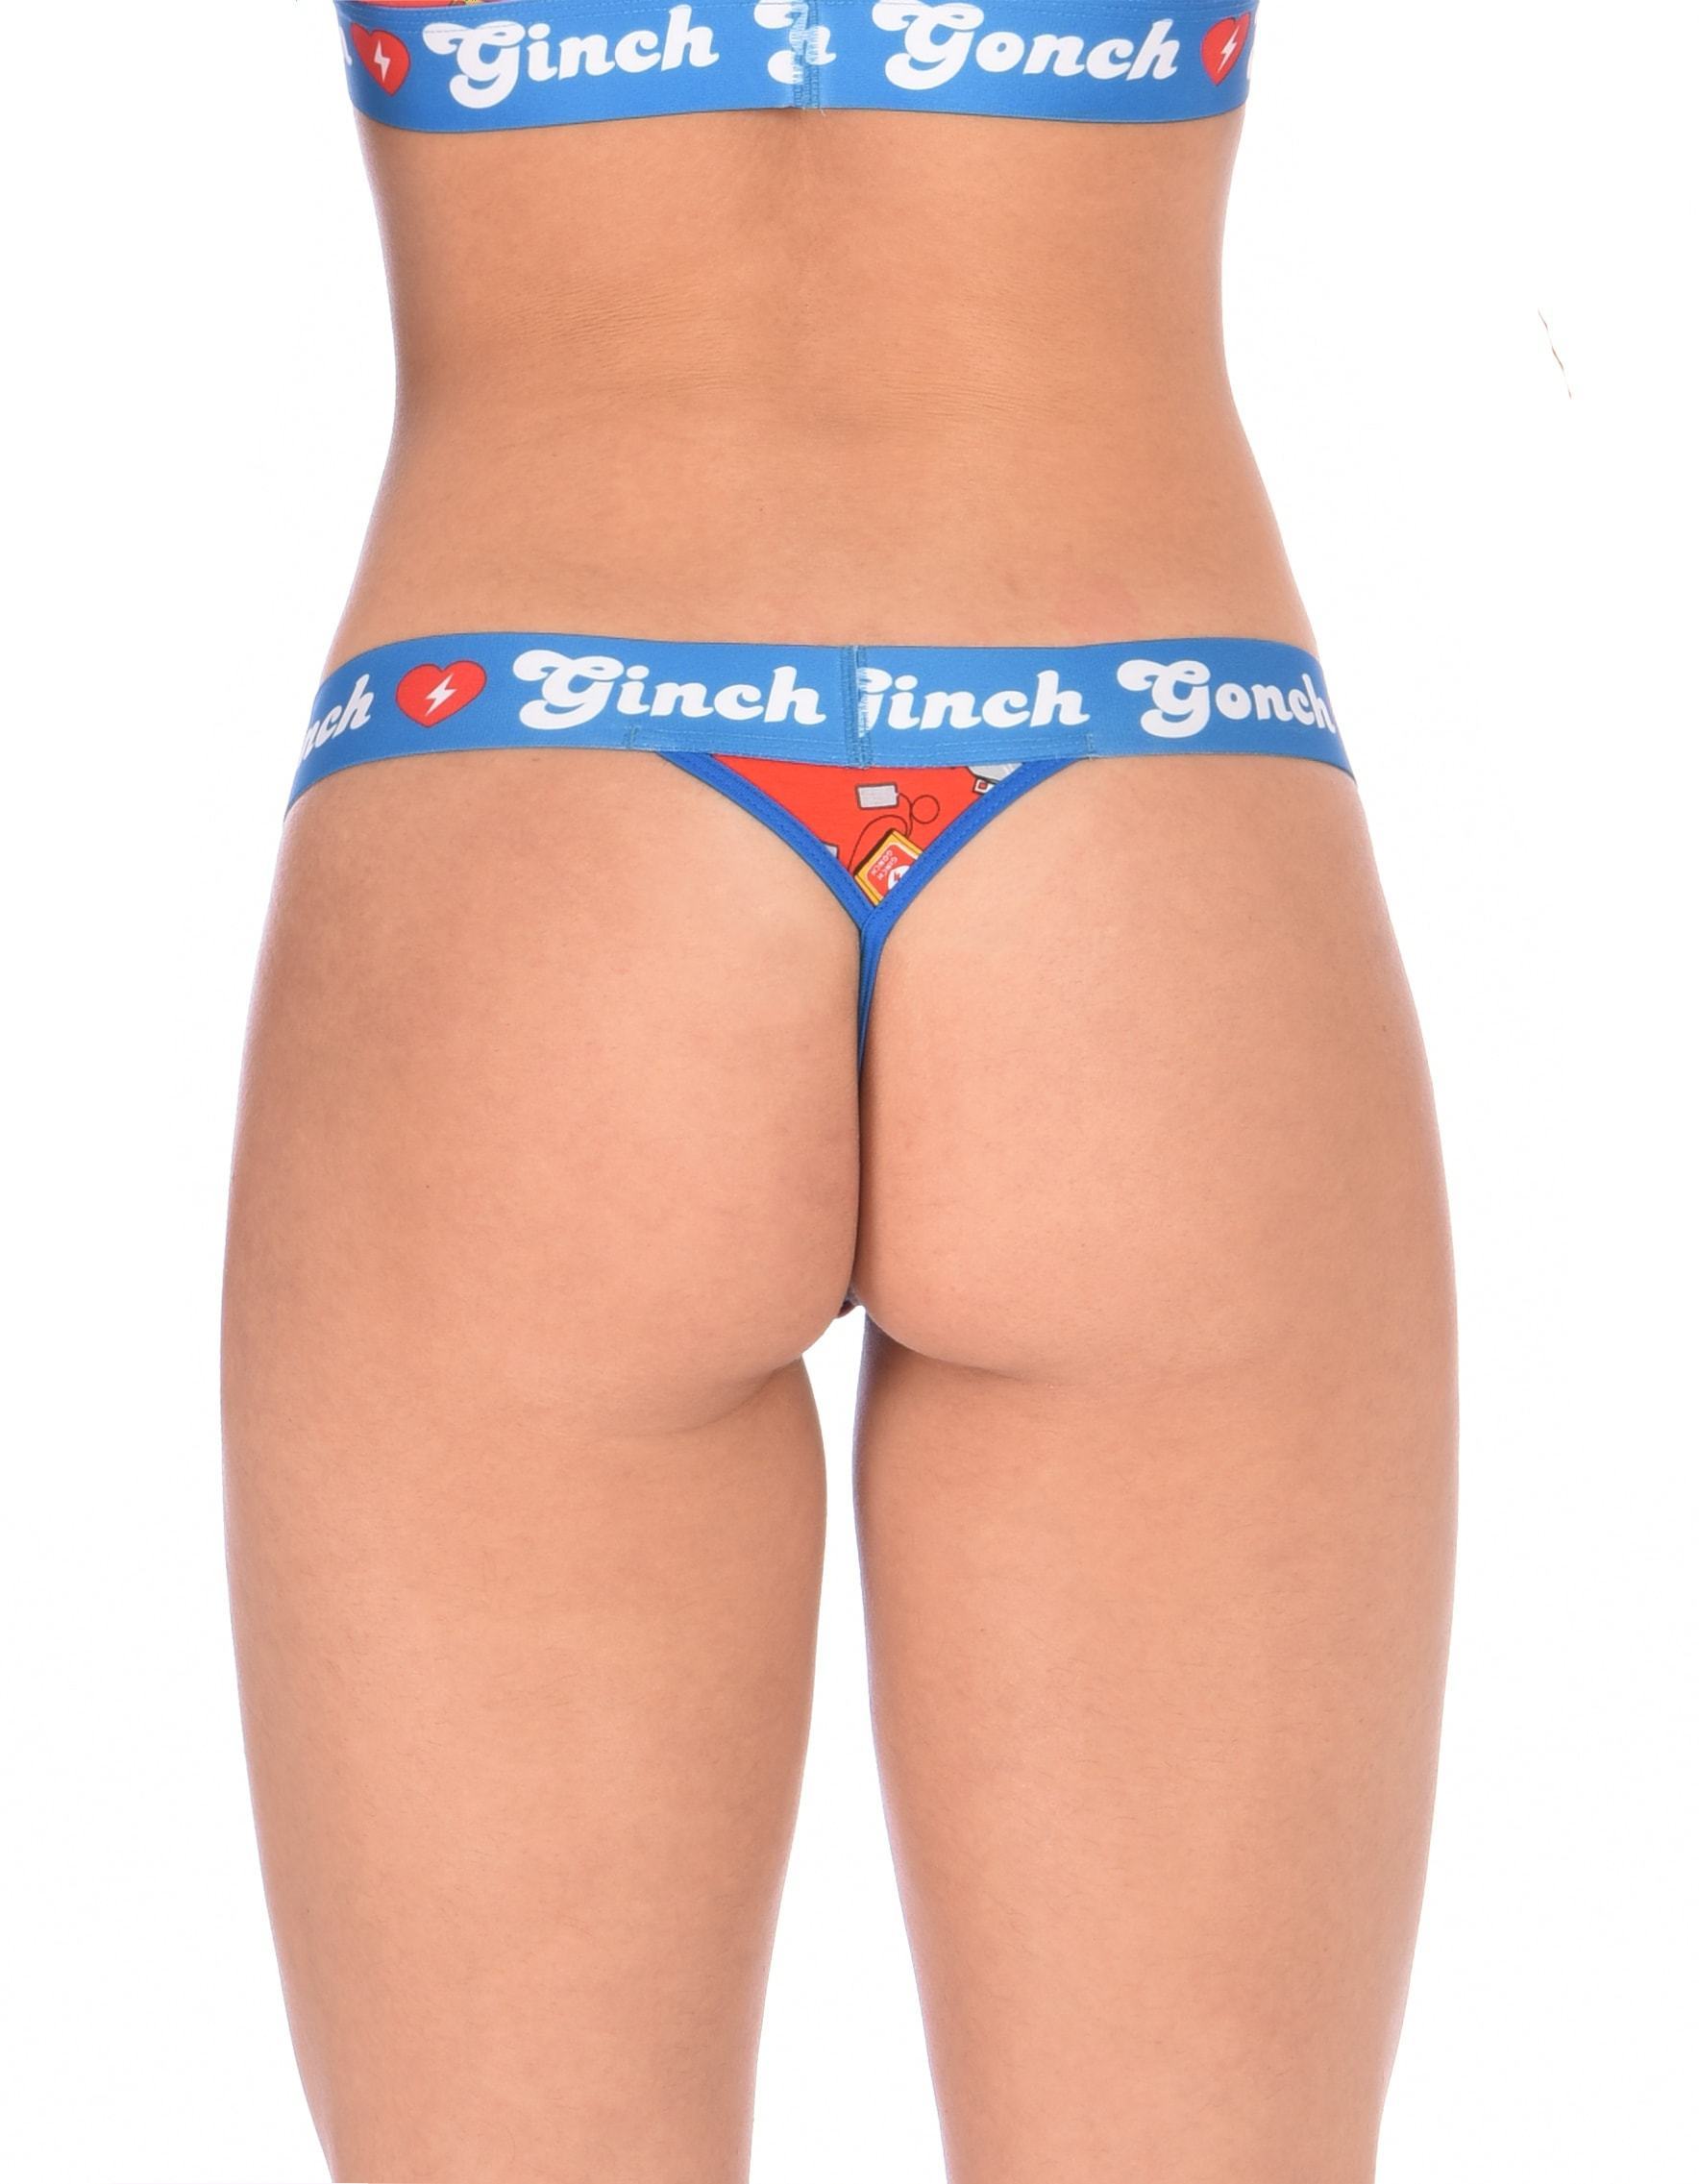 Ginch Gonch GG EMT thong women's ambulance print with medical symbol and equipment on red background with blue trim and printed waistband back